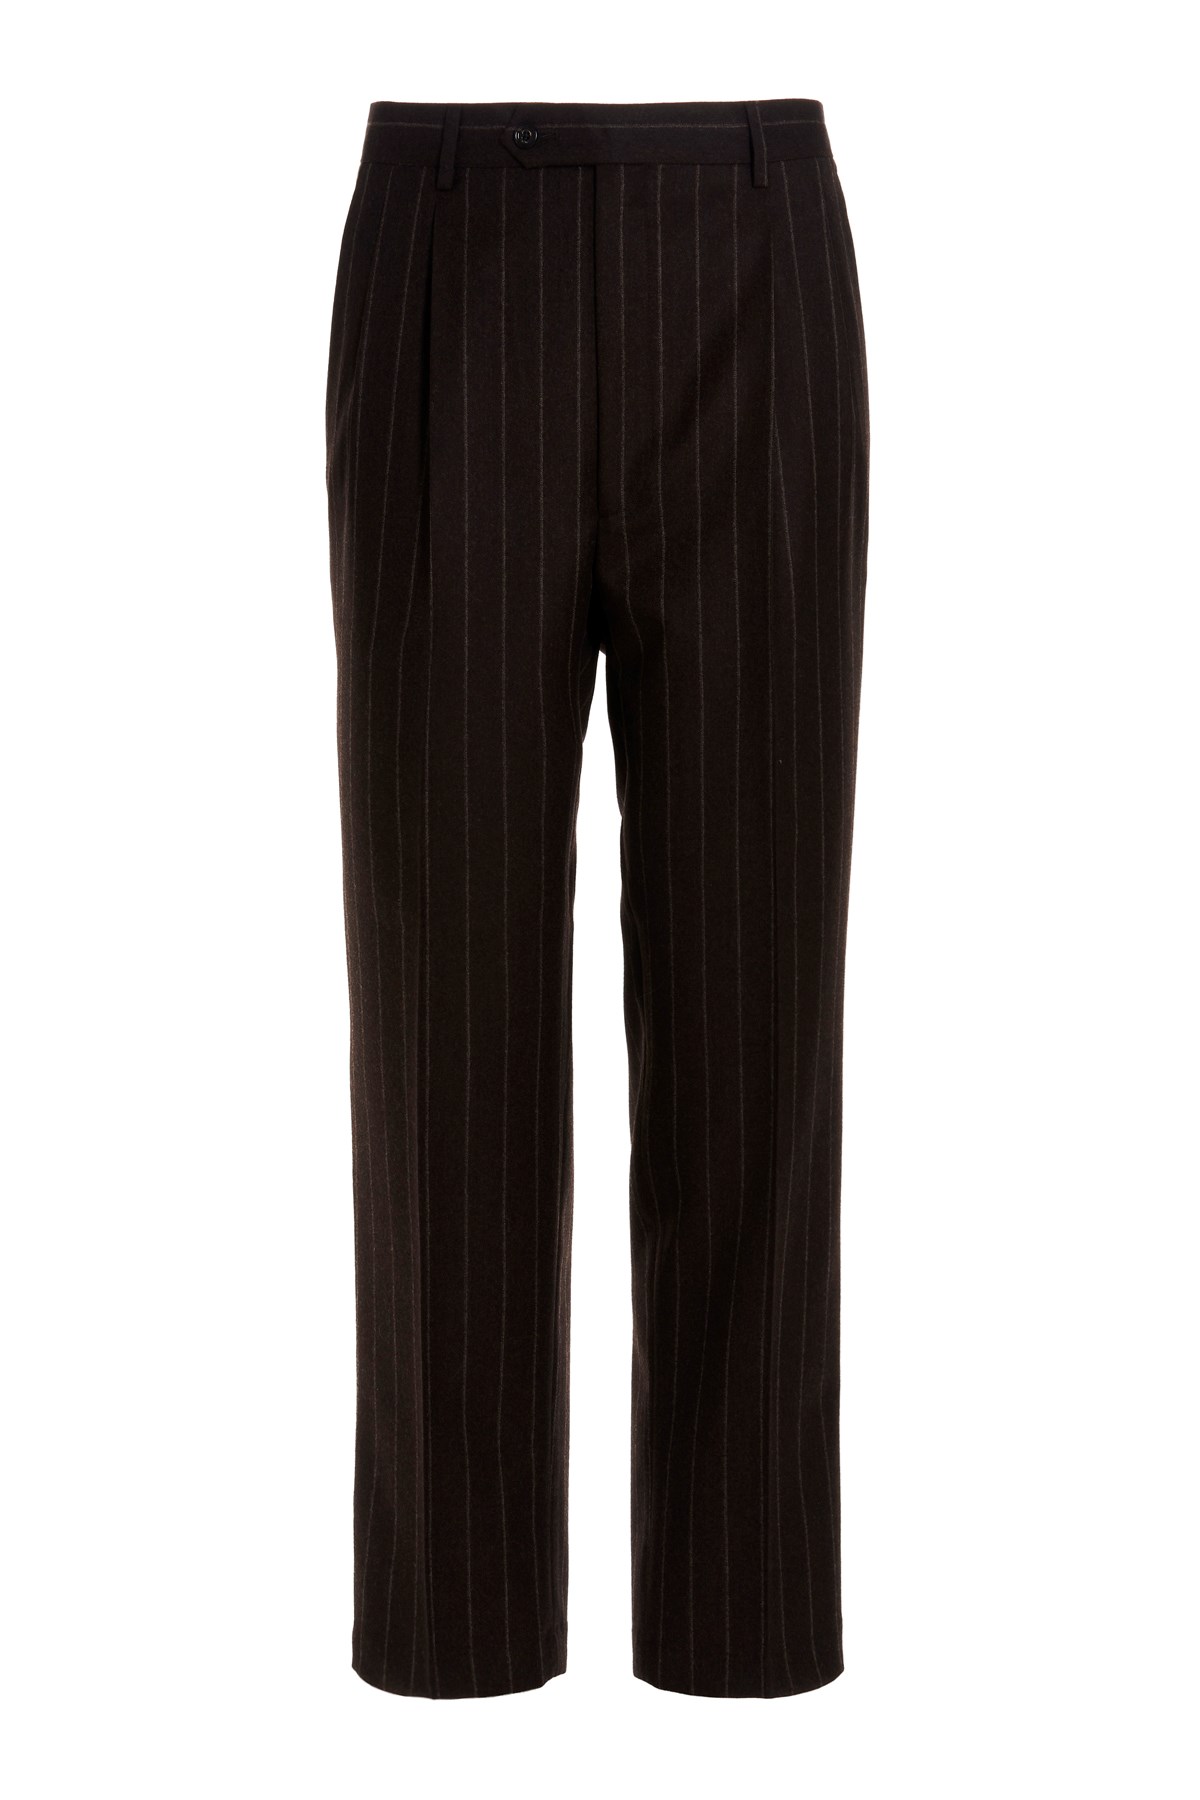 LC23 Pinstriped Trousers By Vitale Barberis